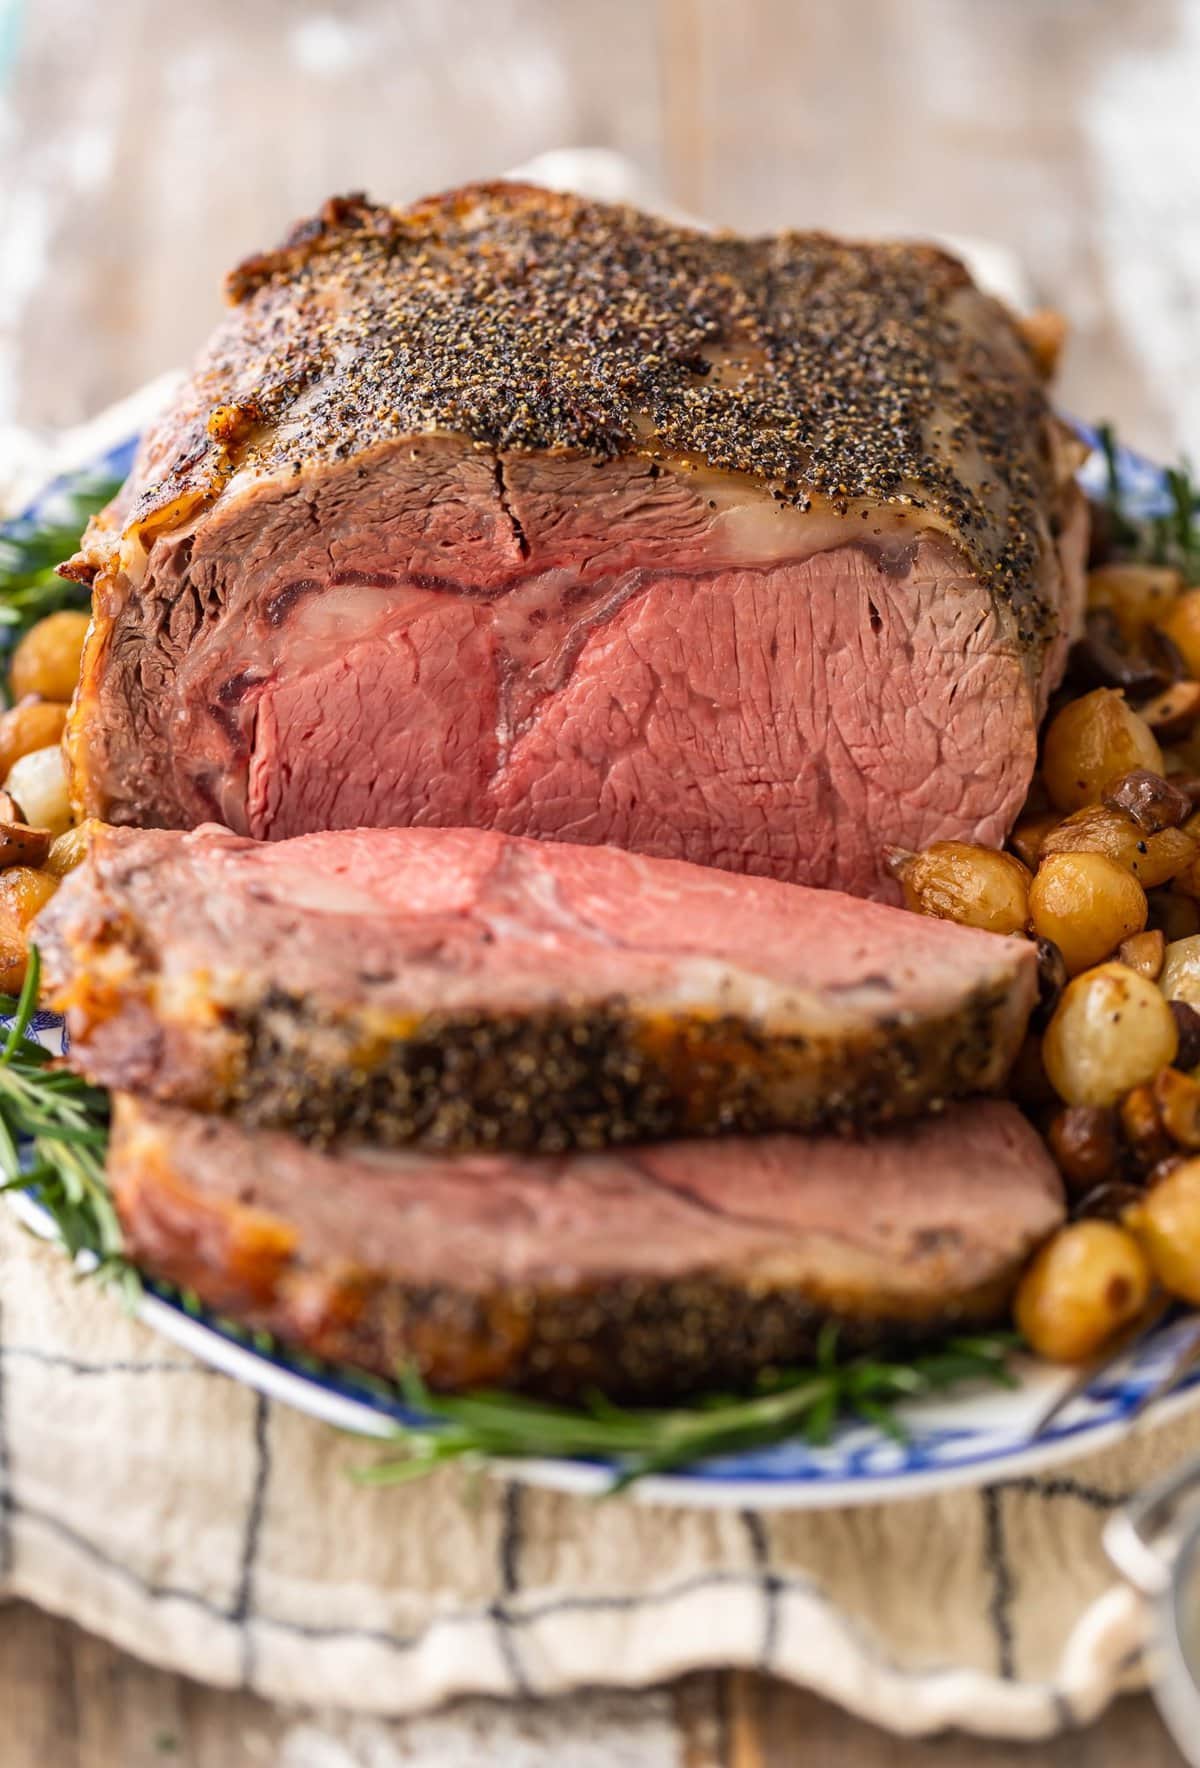 Best Prime Rib Roast Recipe How To Cook Prime Rib In The Oven,Sauteed Mushrooms Png